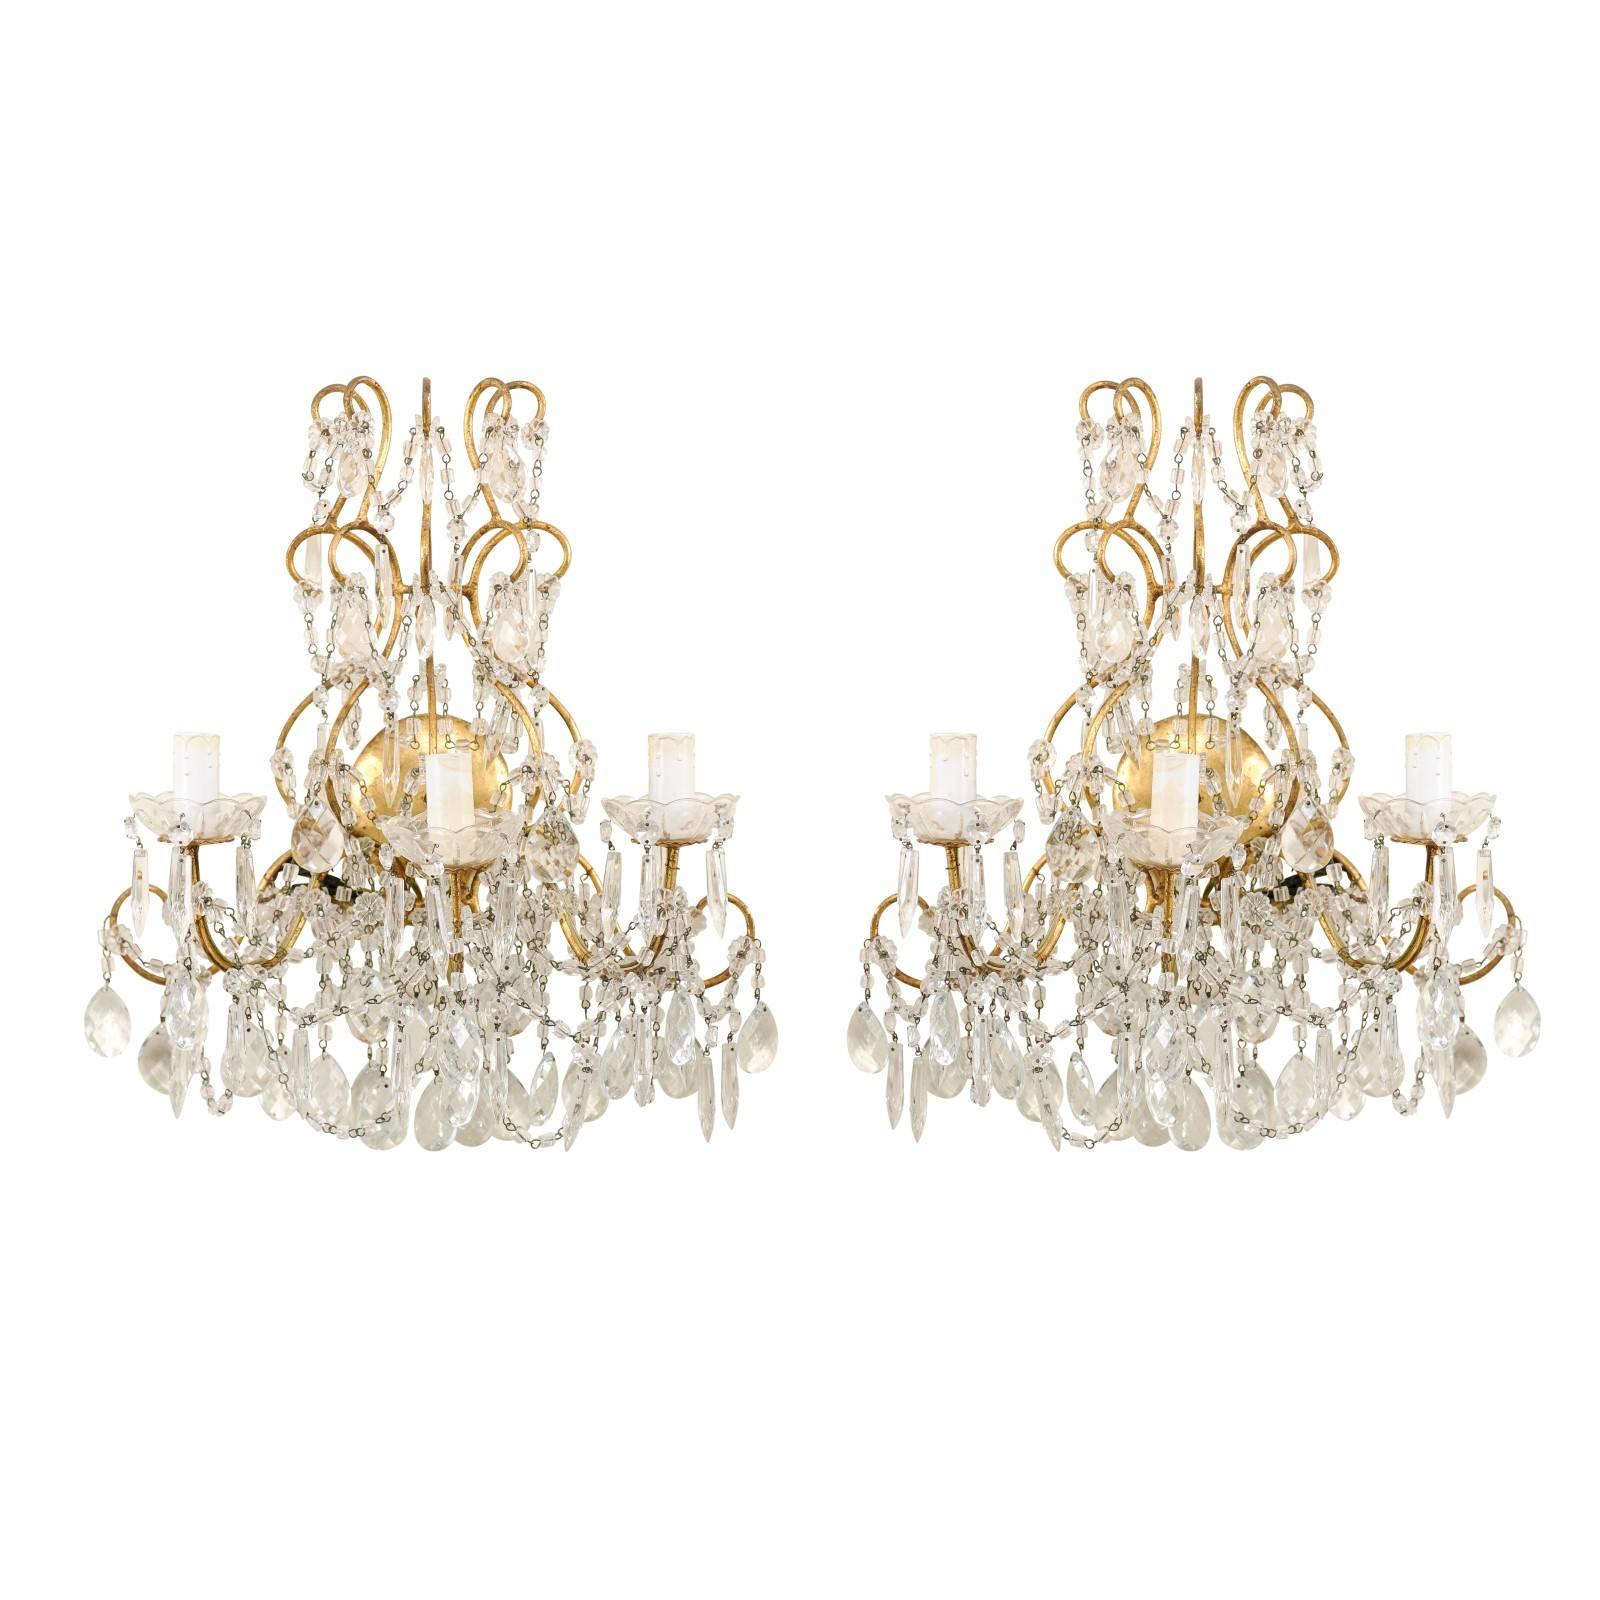 Italian Pair of Ornately Decorated Crystal & Gilded Metal Three-Light Sconces